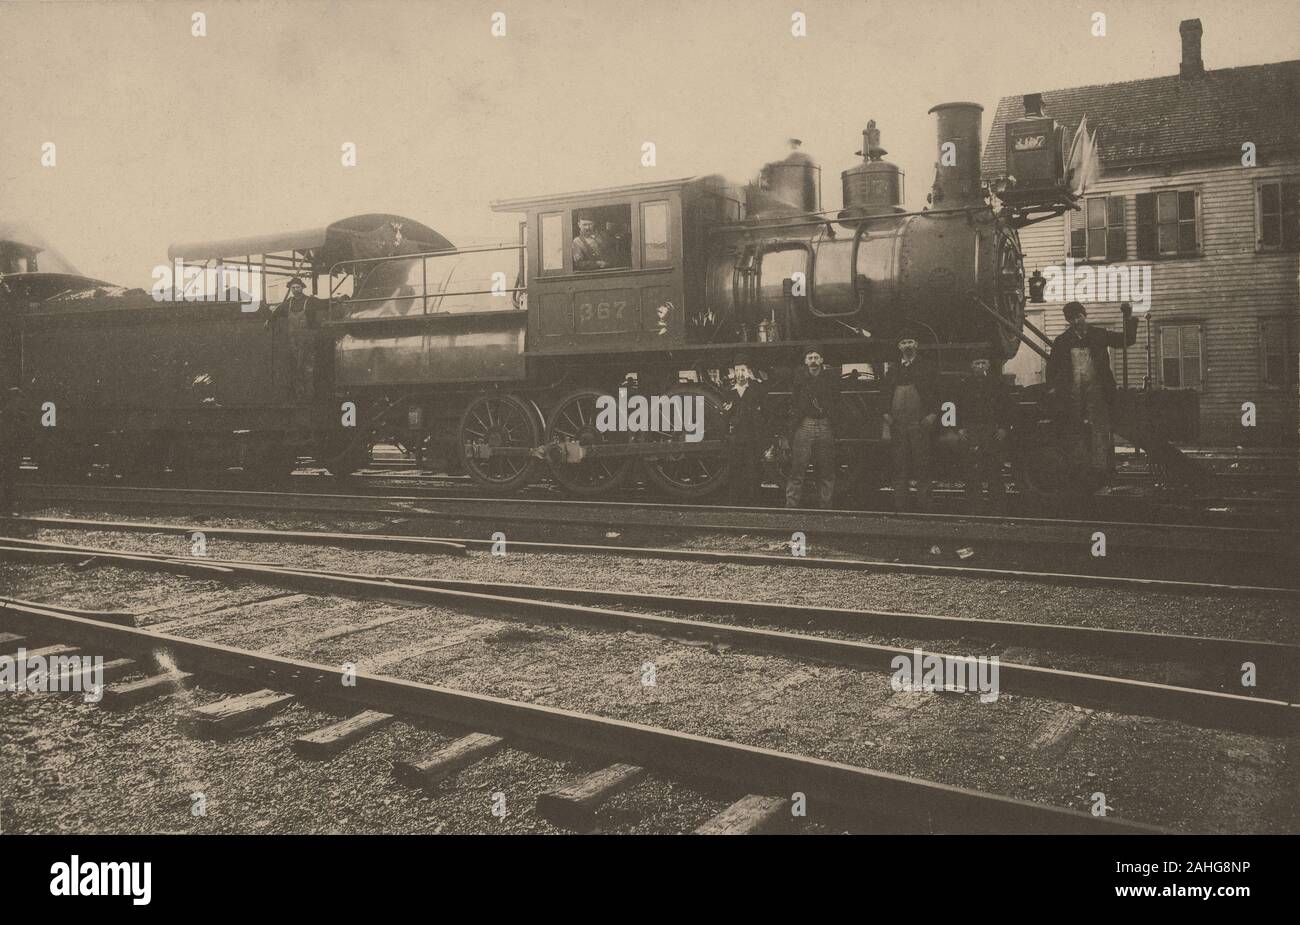 Antique c1890 photograph, “Central Railroad of New Jersey Mother Hubbard engine No 367 at Elizabethport, New Jersey.” SOURCE: ORIGINAL CYANOTYPE PHOTOGRAPH Stock Photo